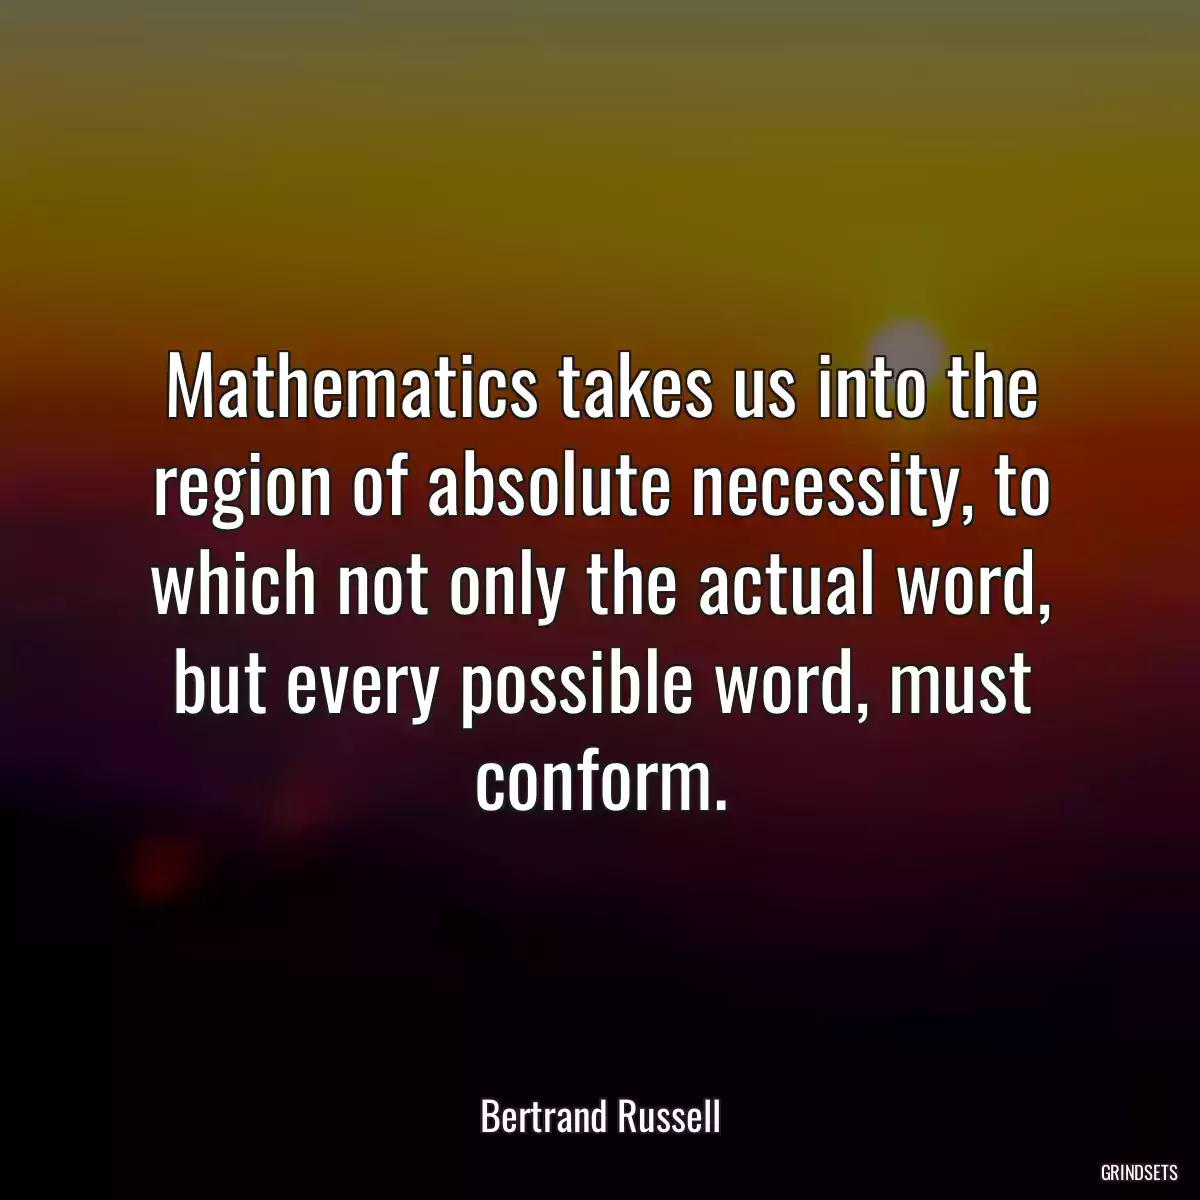 Mathematics takes us into the region of absolute necessity, to which not only the actual word, but every possible word, must conform.